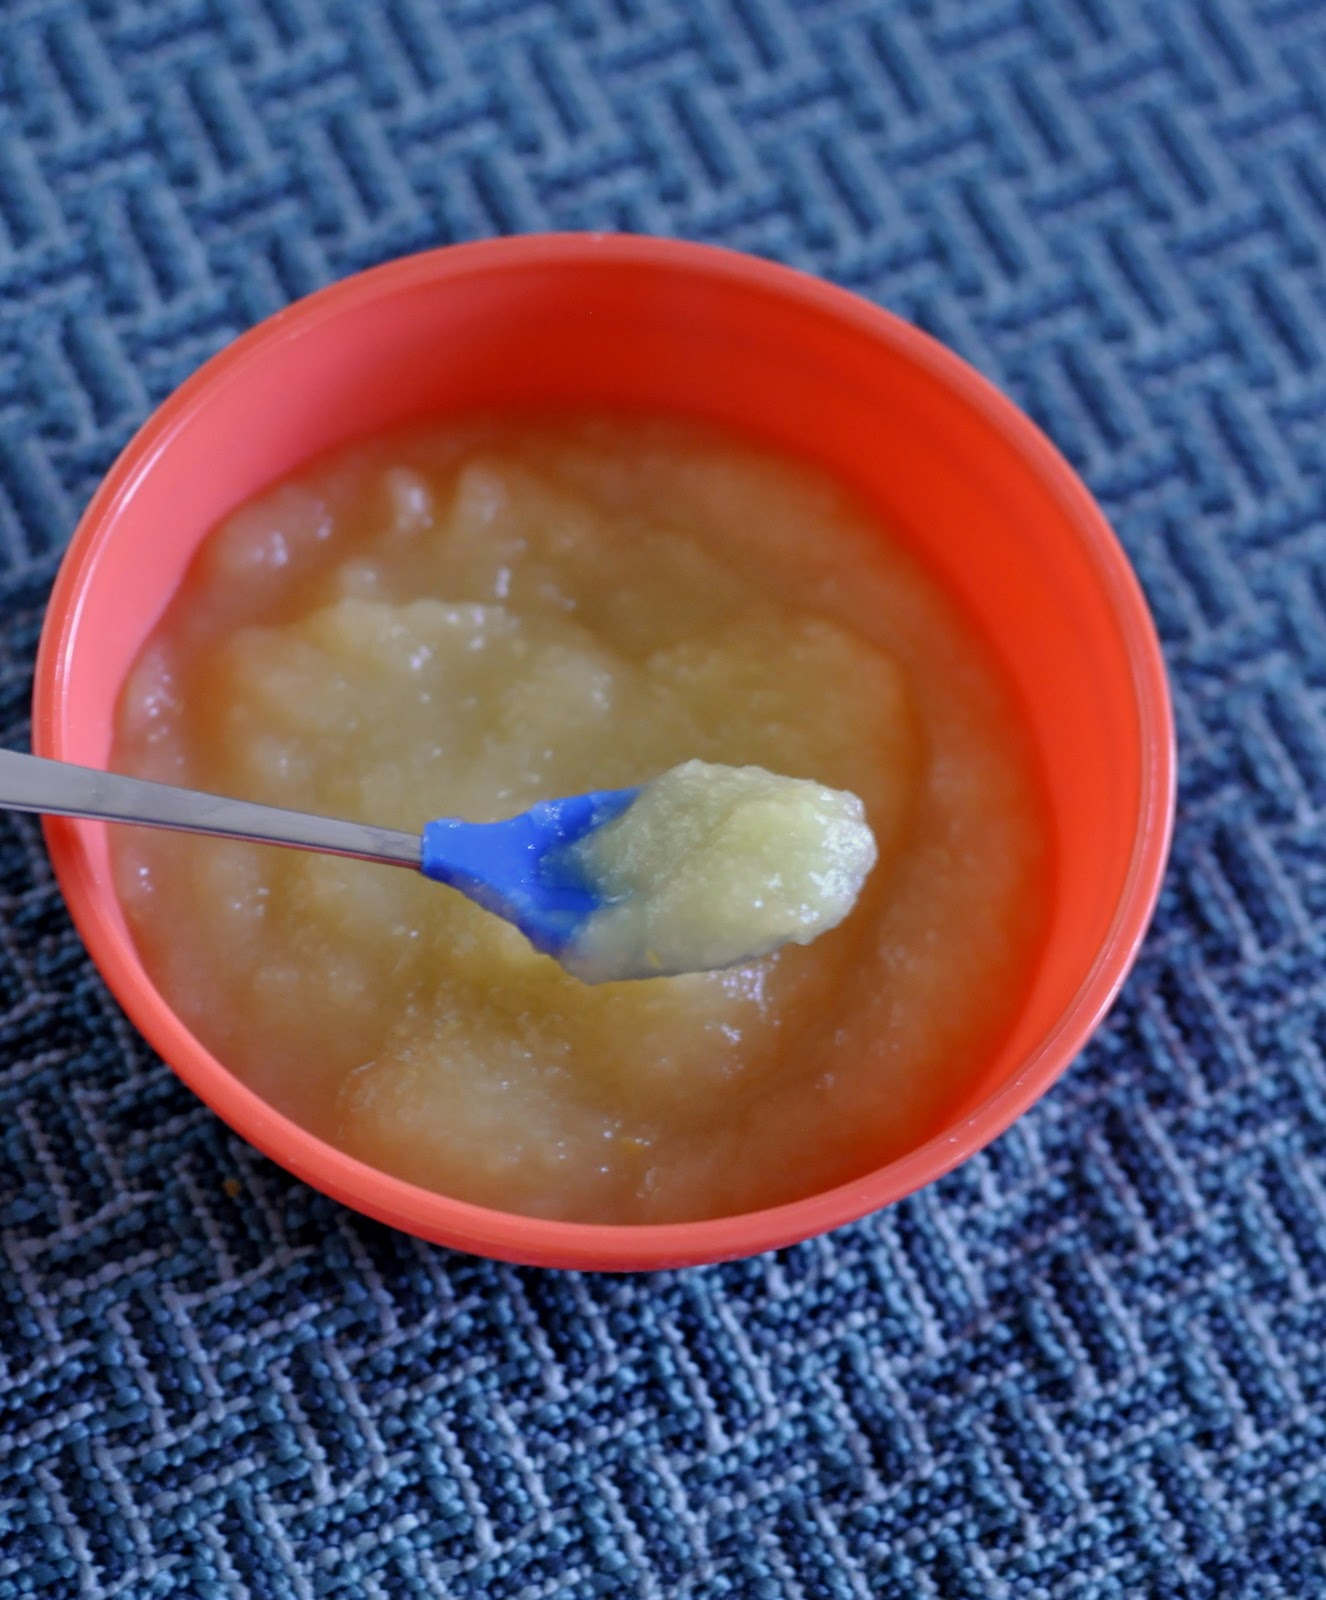 How To: Make and Freeze Homemade Baby Food {Applesauce} | Taste As You Go